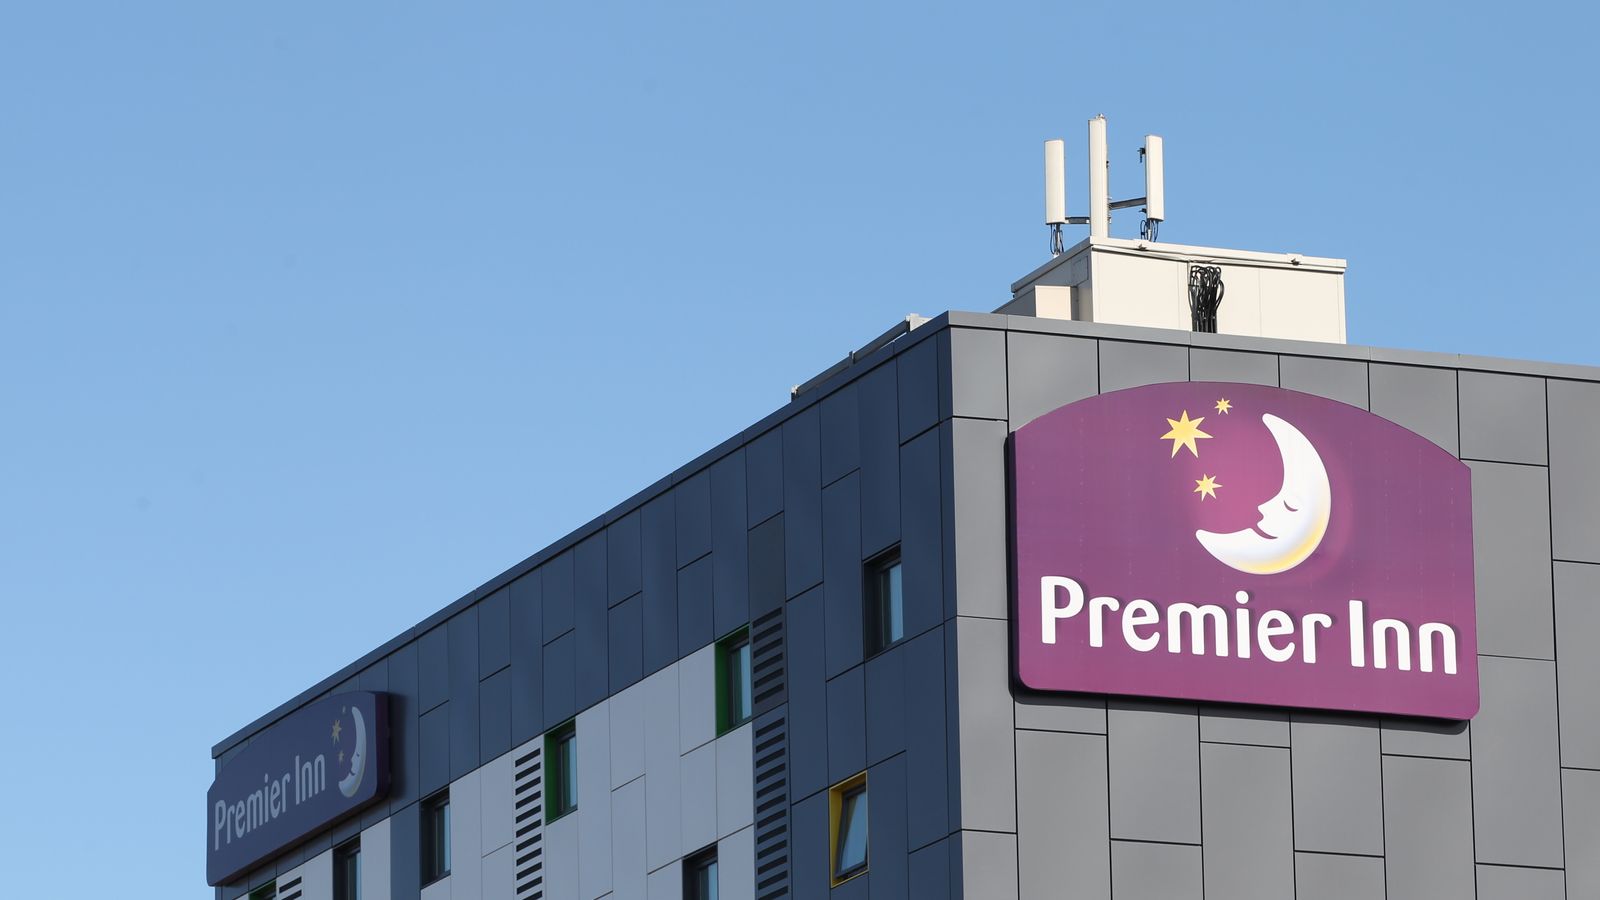 Premier Inn owner Whitbread to cut 1,500 jobs and close over 200 restaurants for hotel expansion